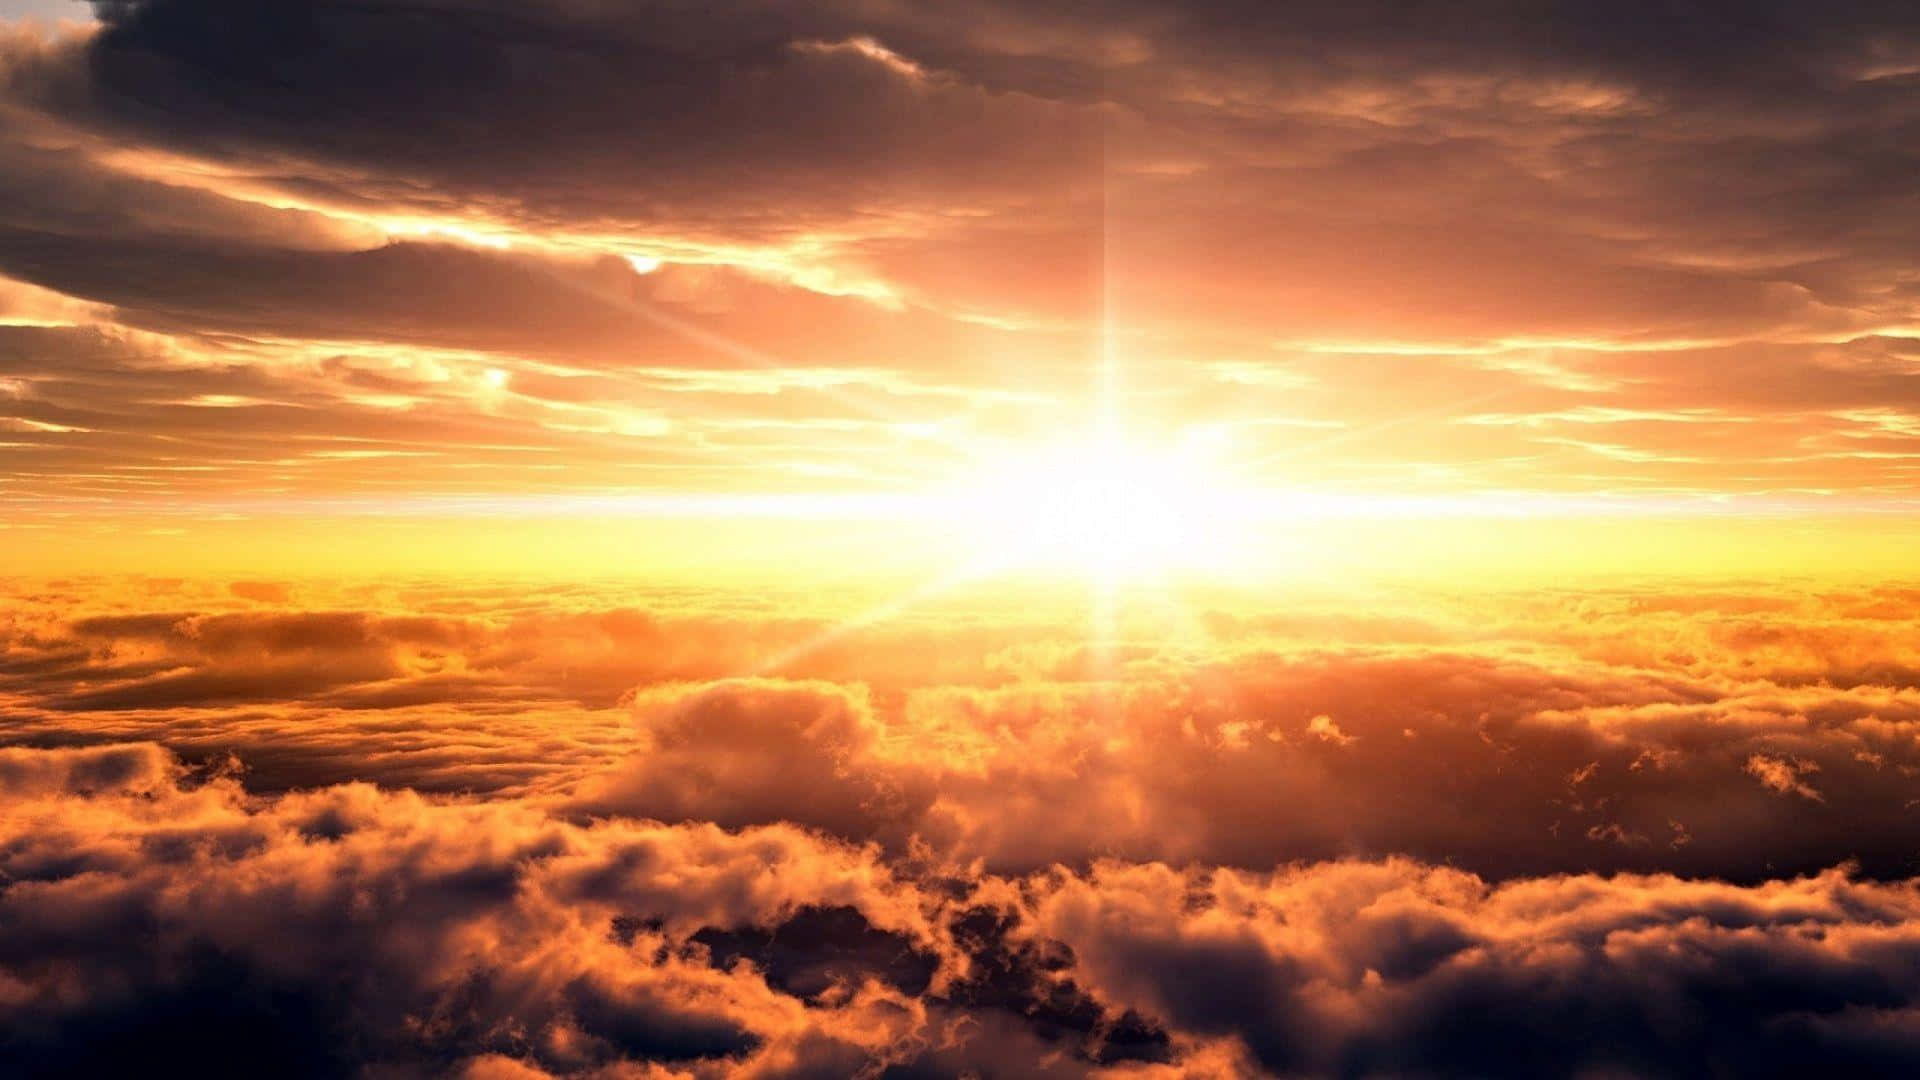 "Behold the beauty of the sun's rays as they bathe the world in beautiful sunshine" Wallpaper